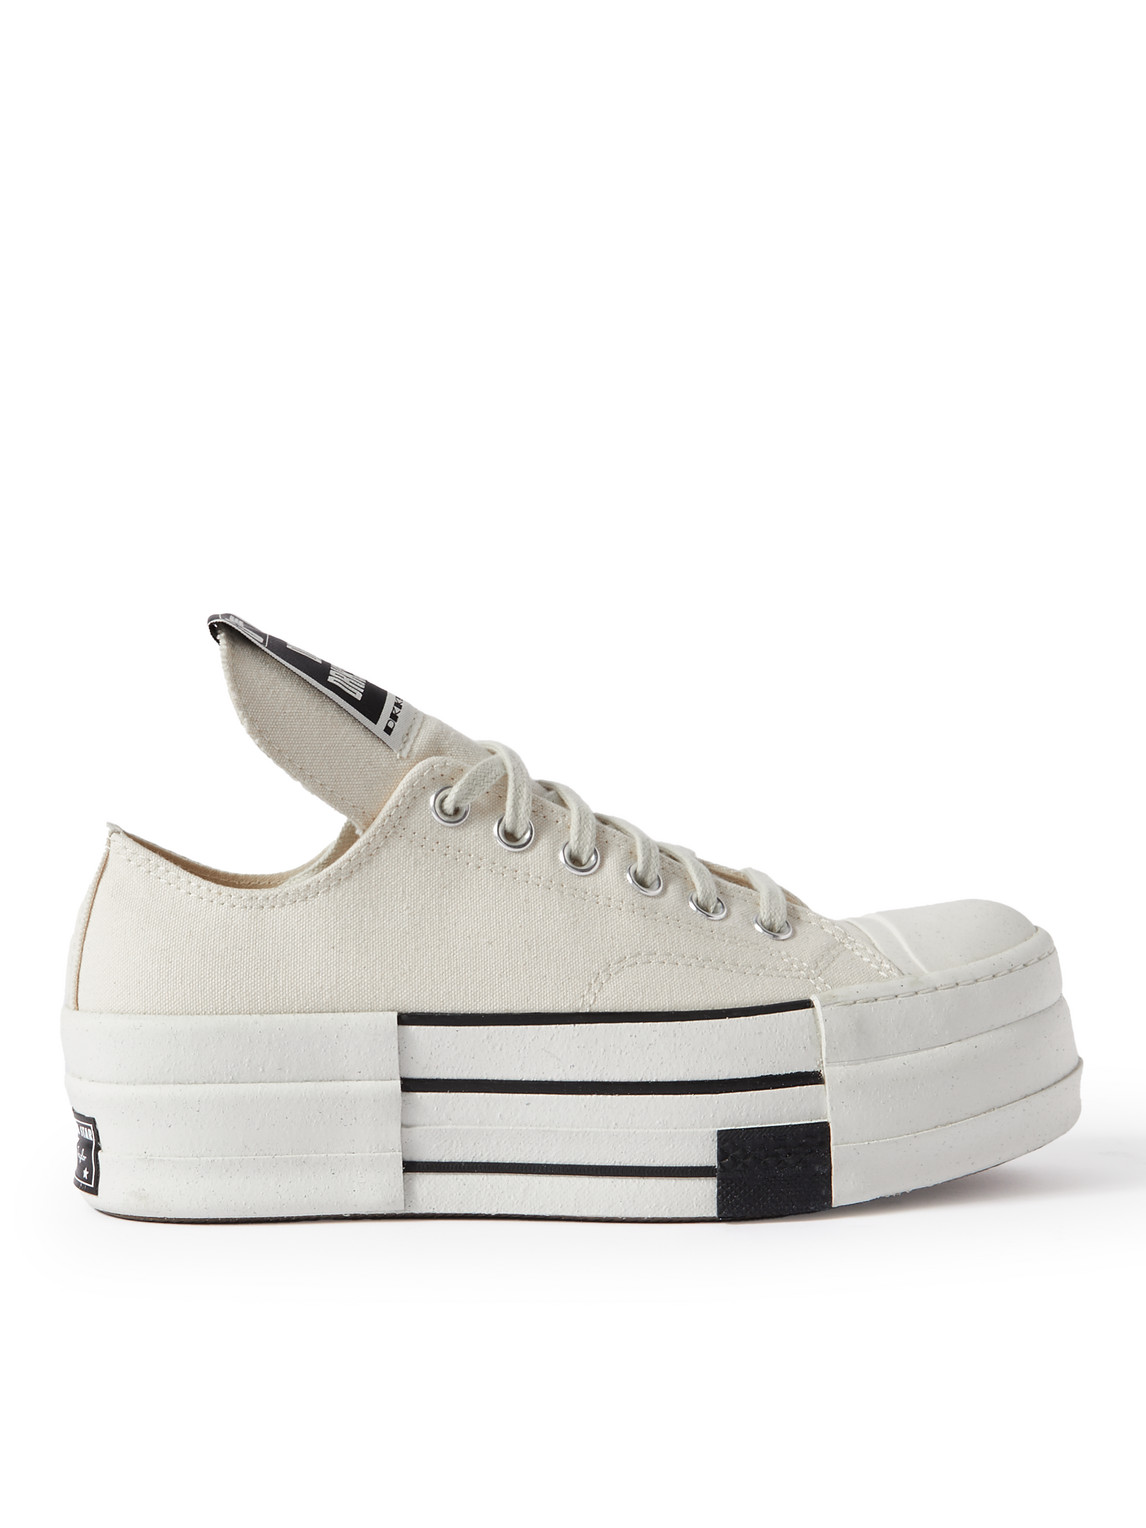 Rick Owens Unisex Beige Trainers In Natural